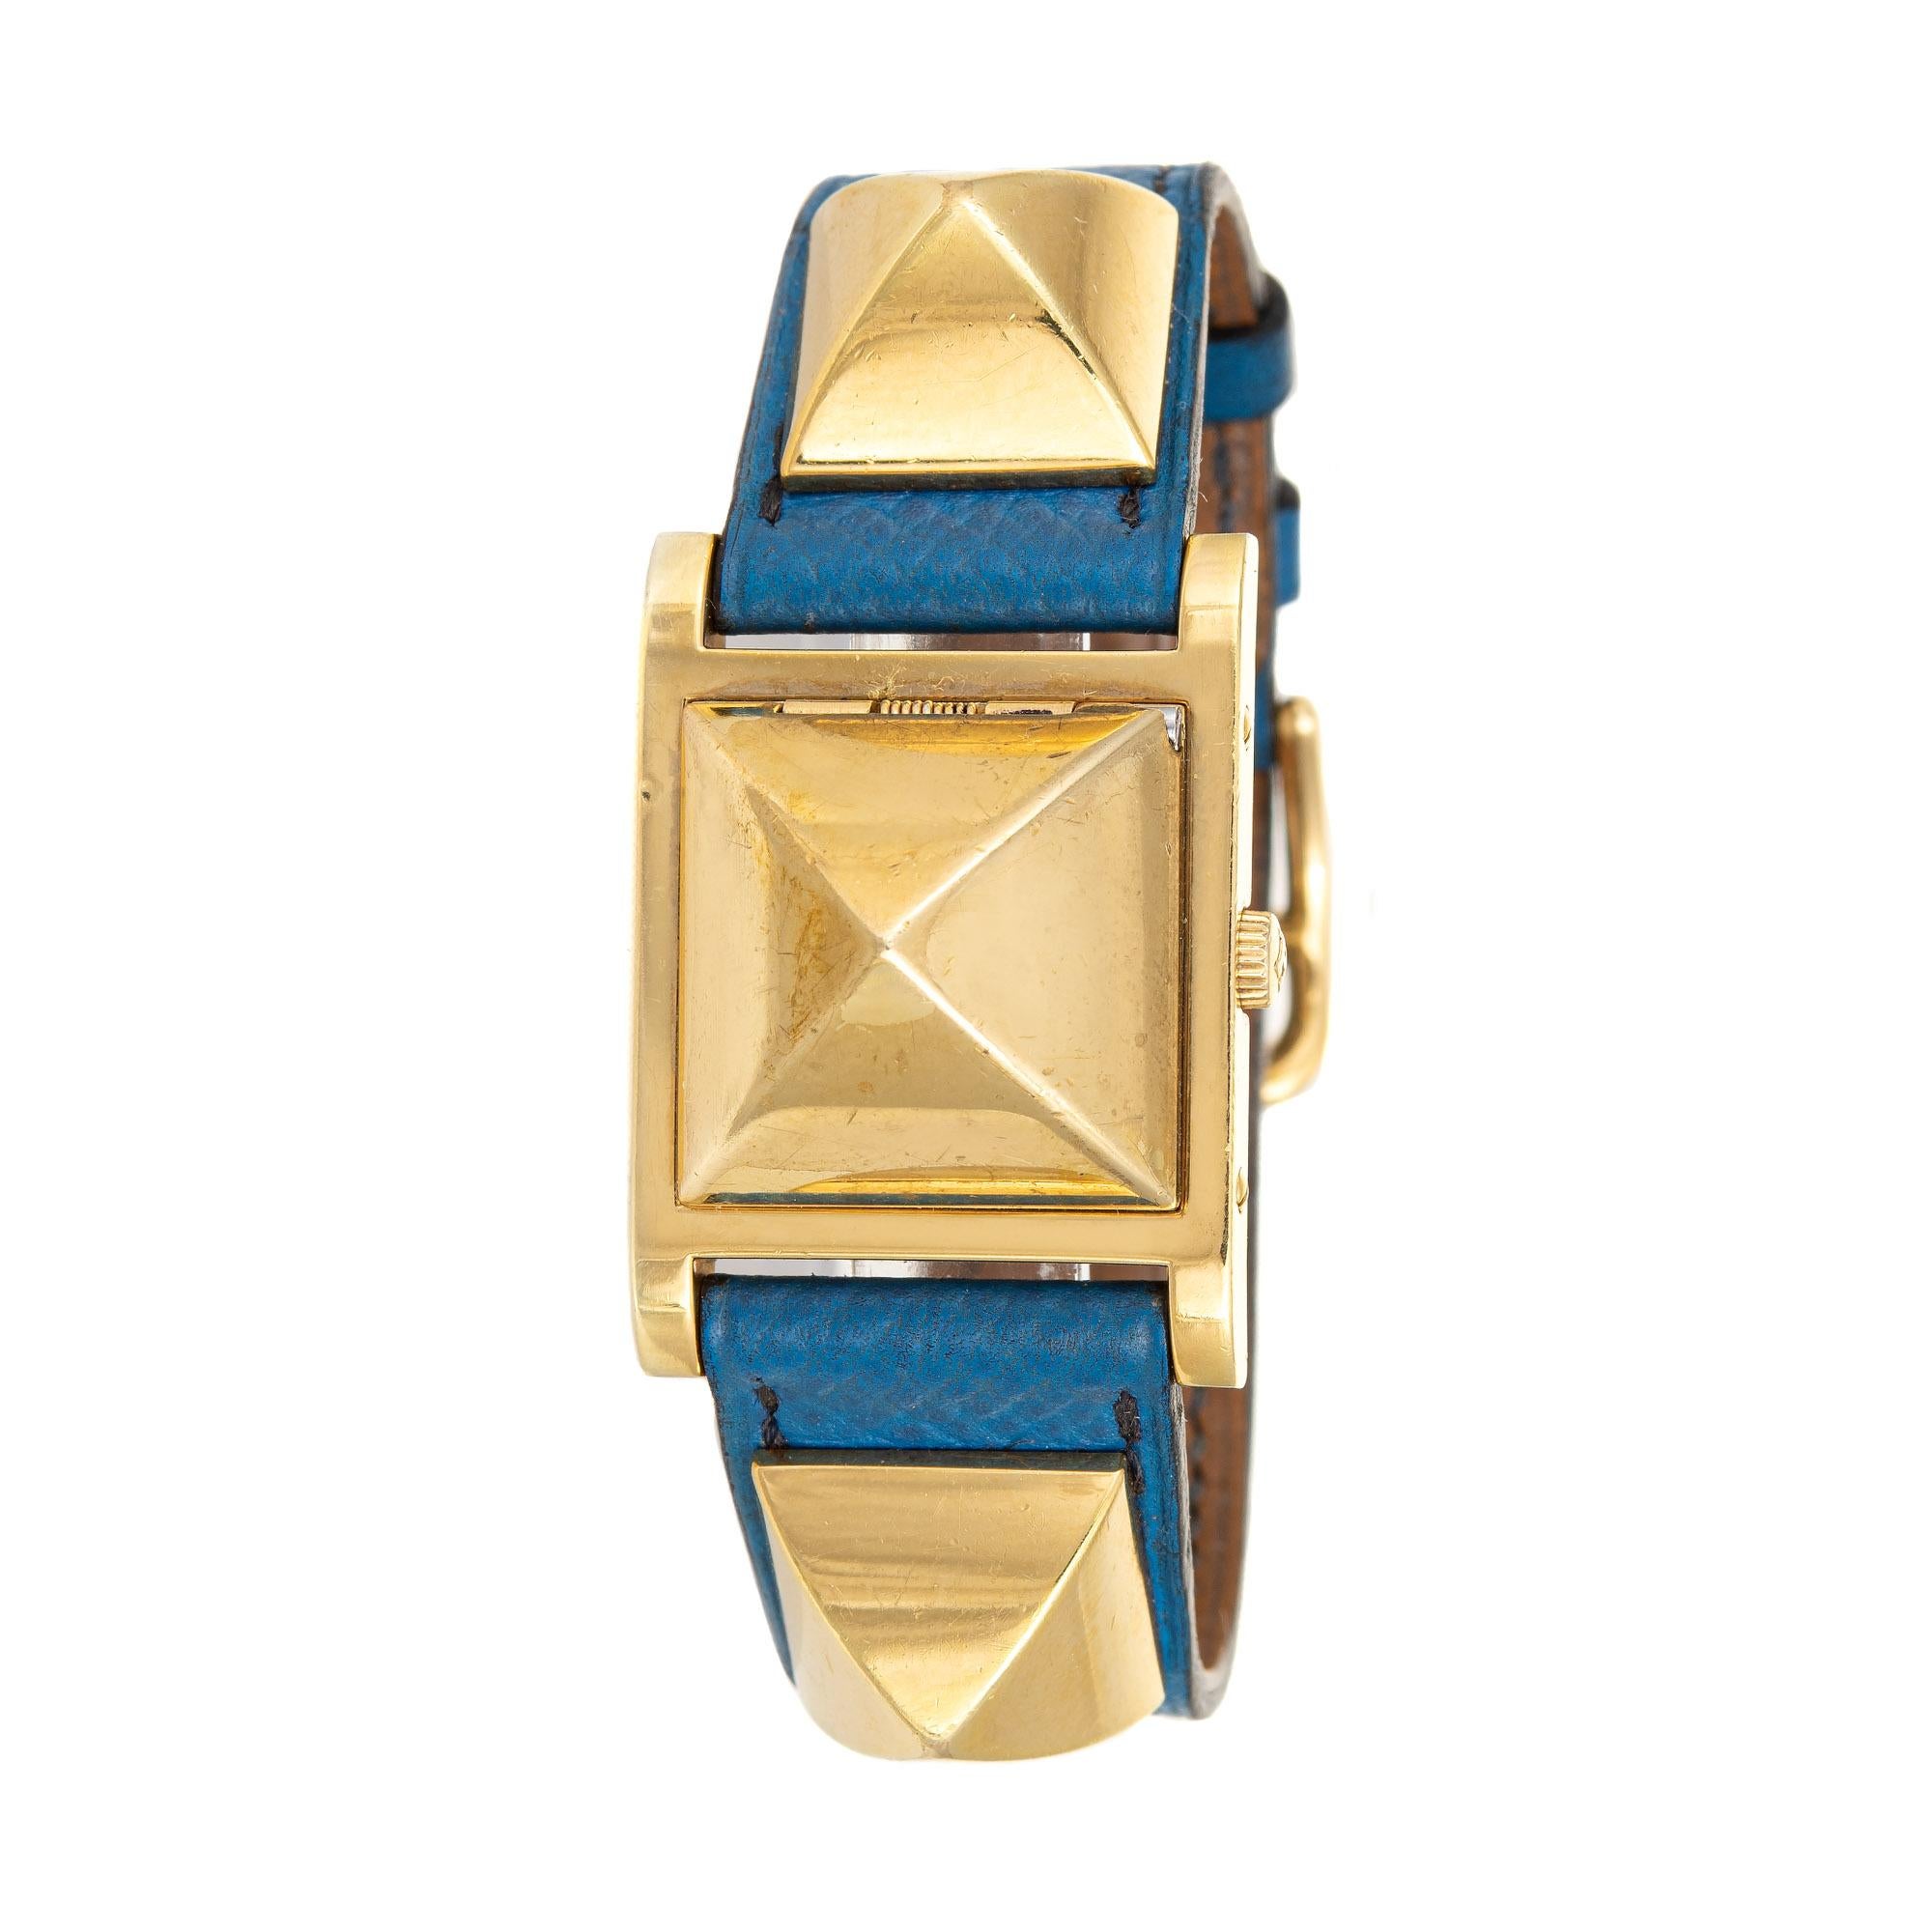 Stylish Hermes Medor wristwatch finished with yellow gold plate. 

The classic Hermes Medor watch features the original blue leather strap. The center pyramid shaped case flips open to reveal the watch dial. The watch dates to 1994 and is in good